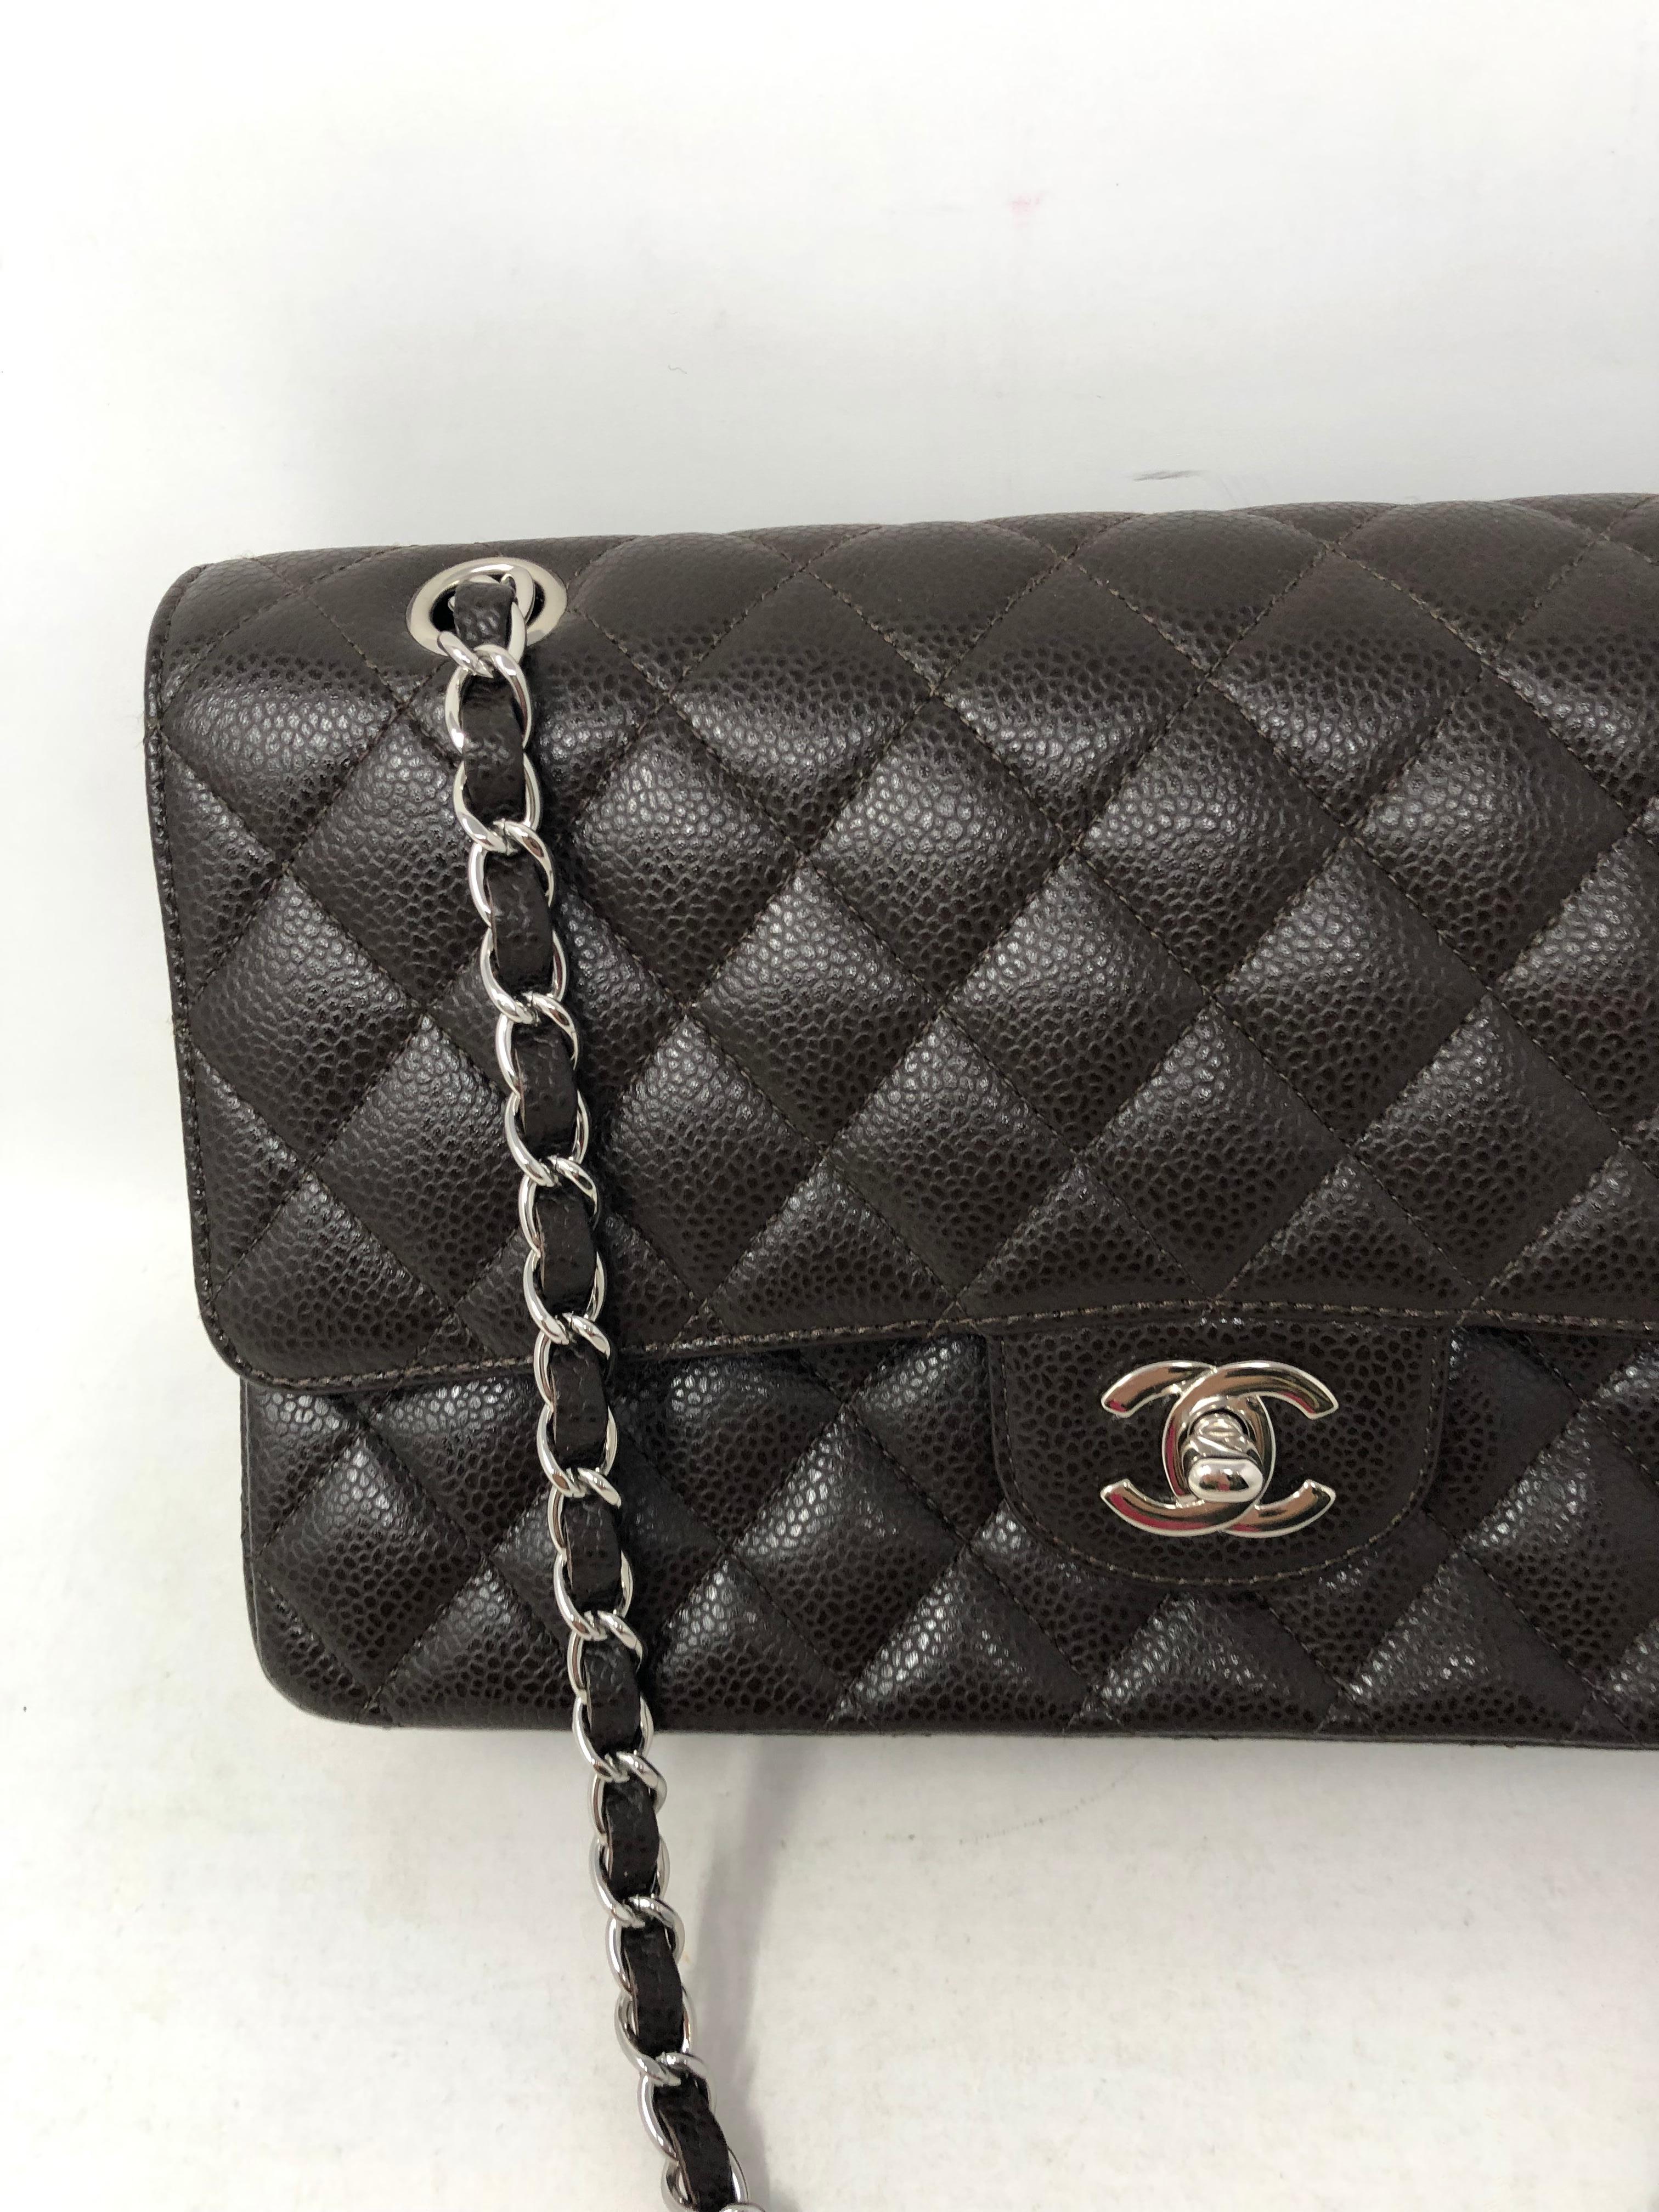 Chanel Brown Caviar Leather Double Flap Bag. Silver hardware. Mint like new condition. Dark brown caviar leather. Classic style and most wanted size, medium 10